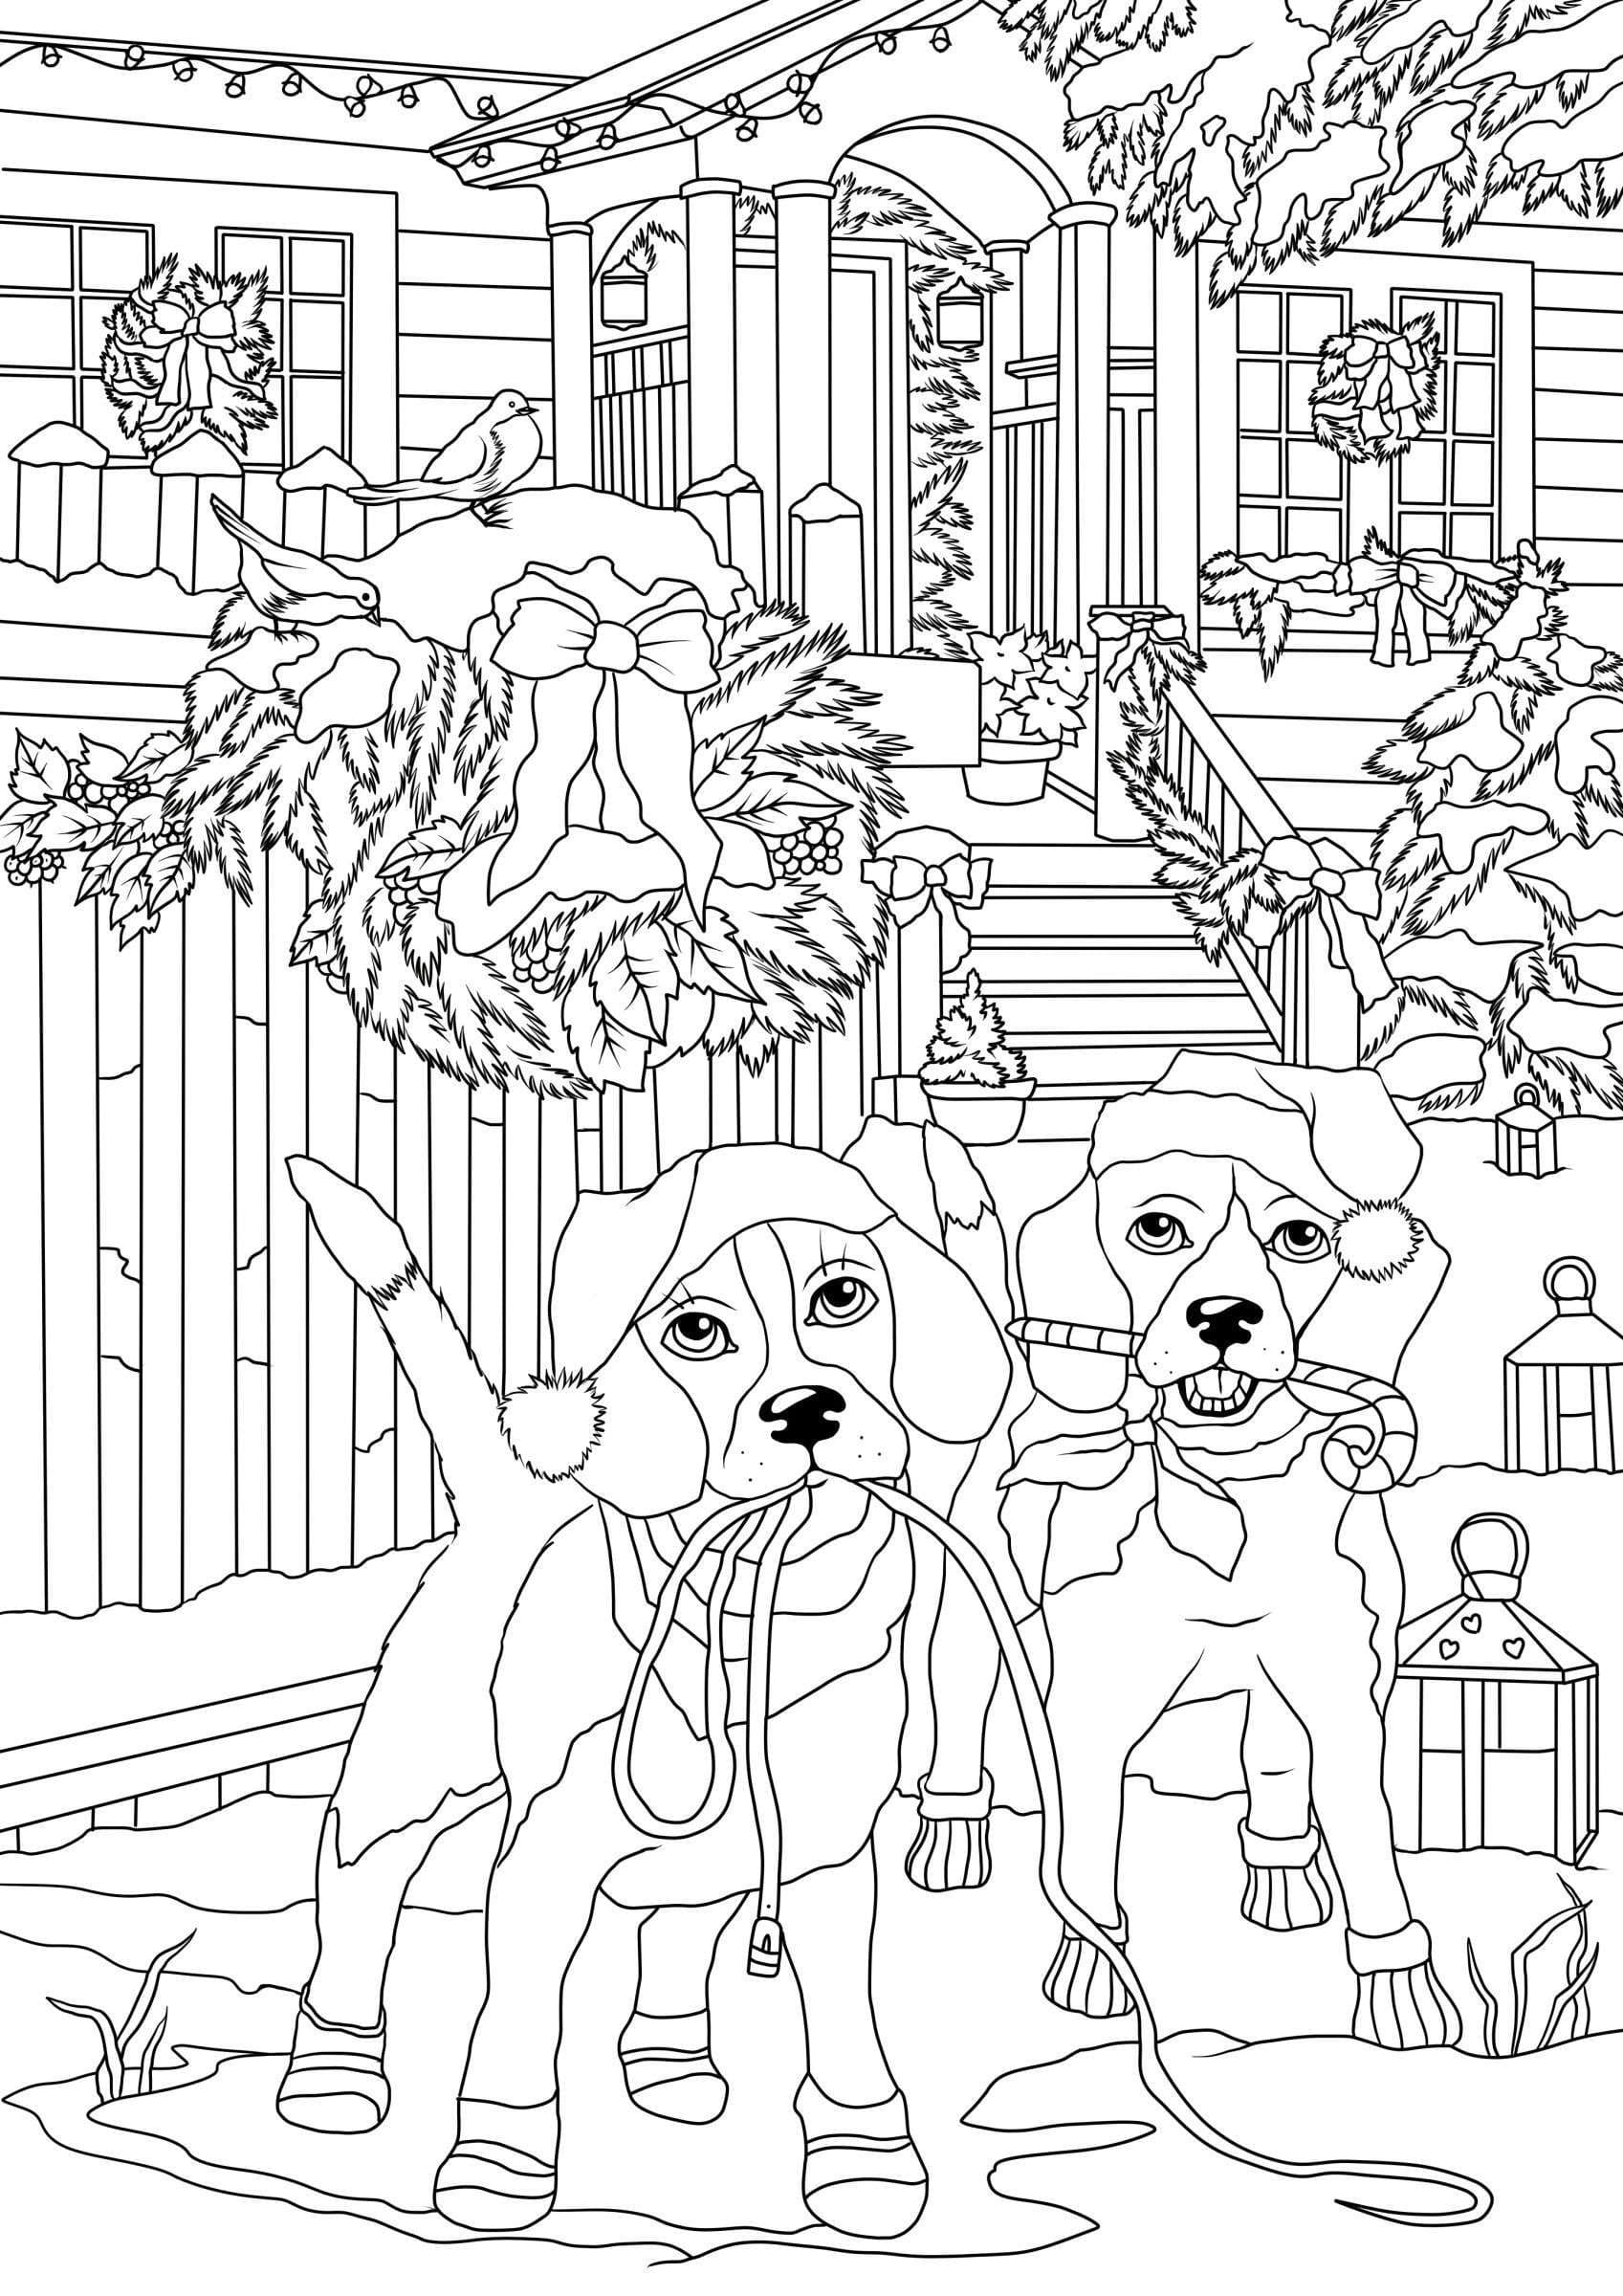 Detailed Christmas Coloring Page